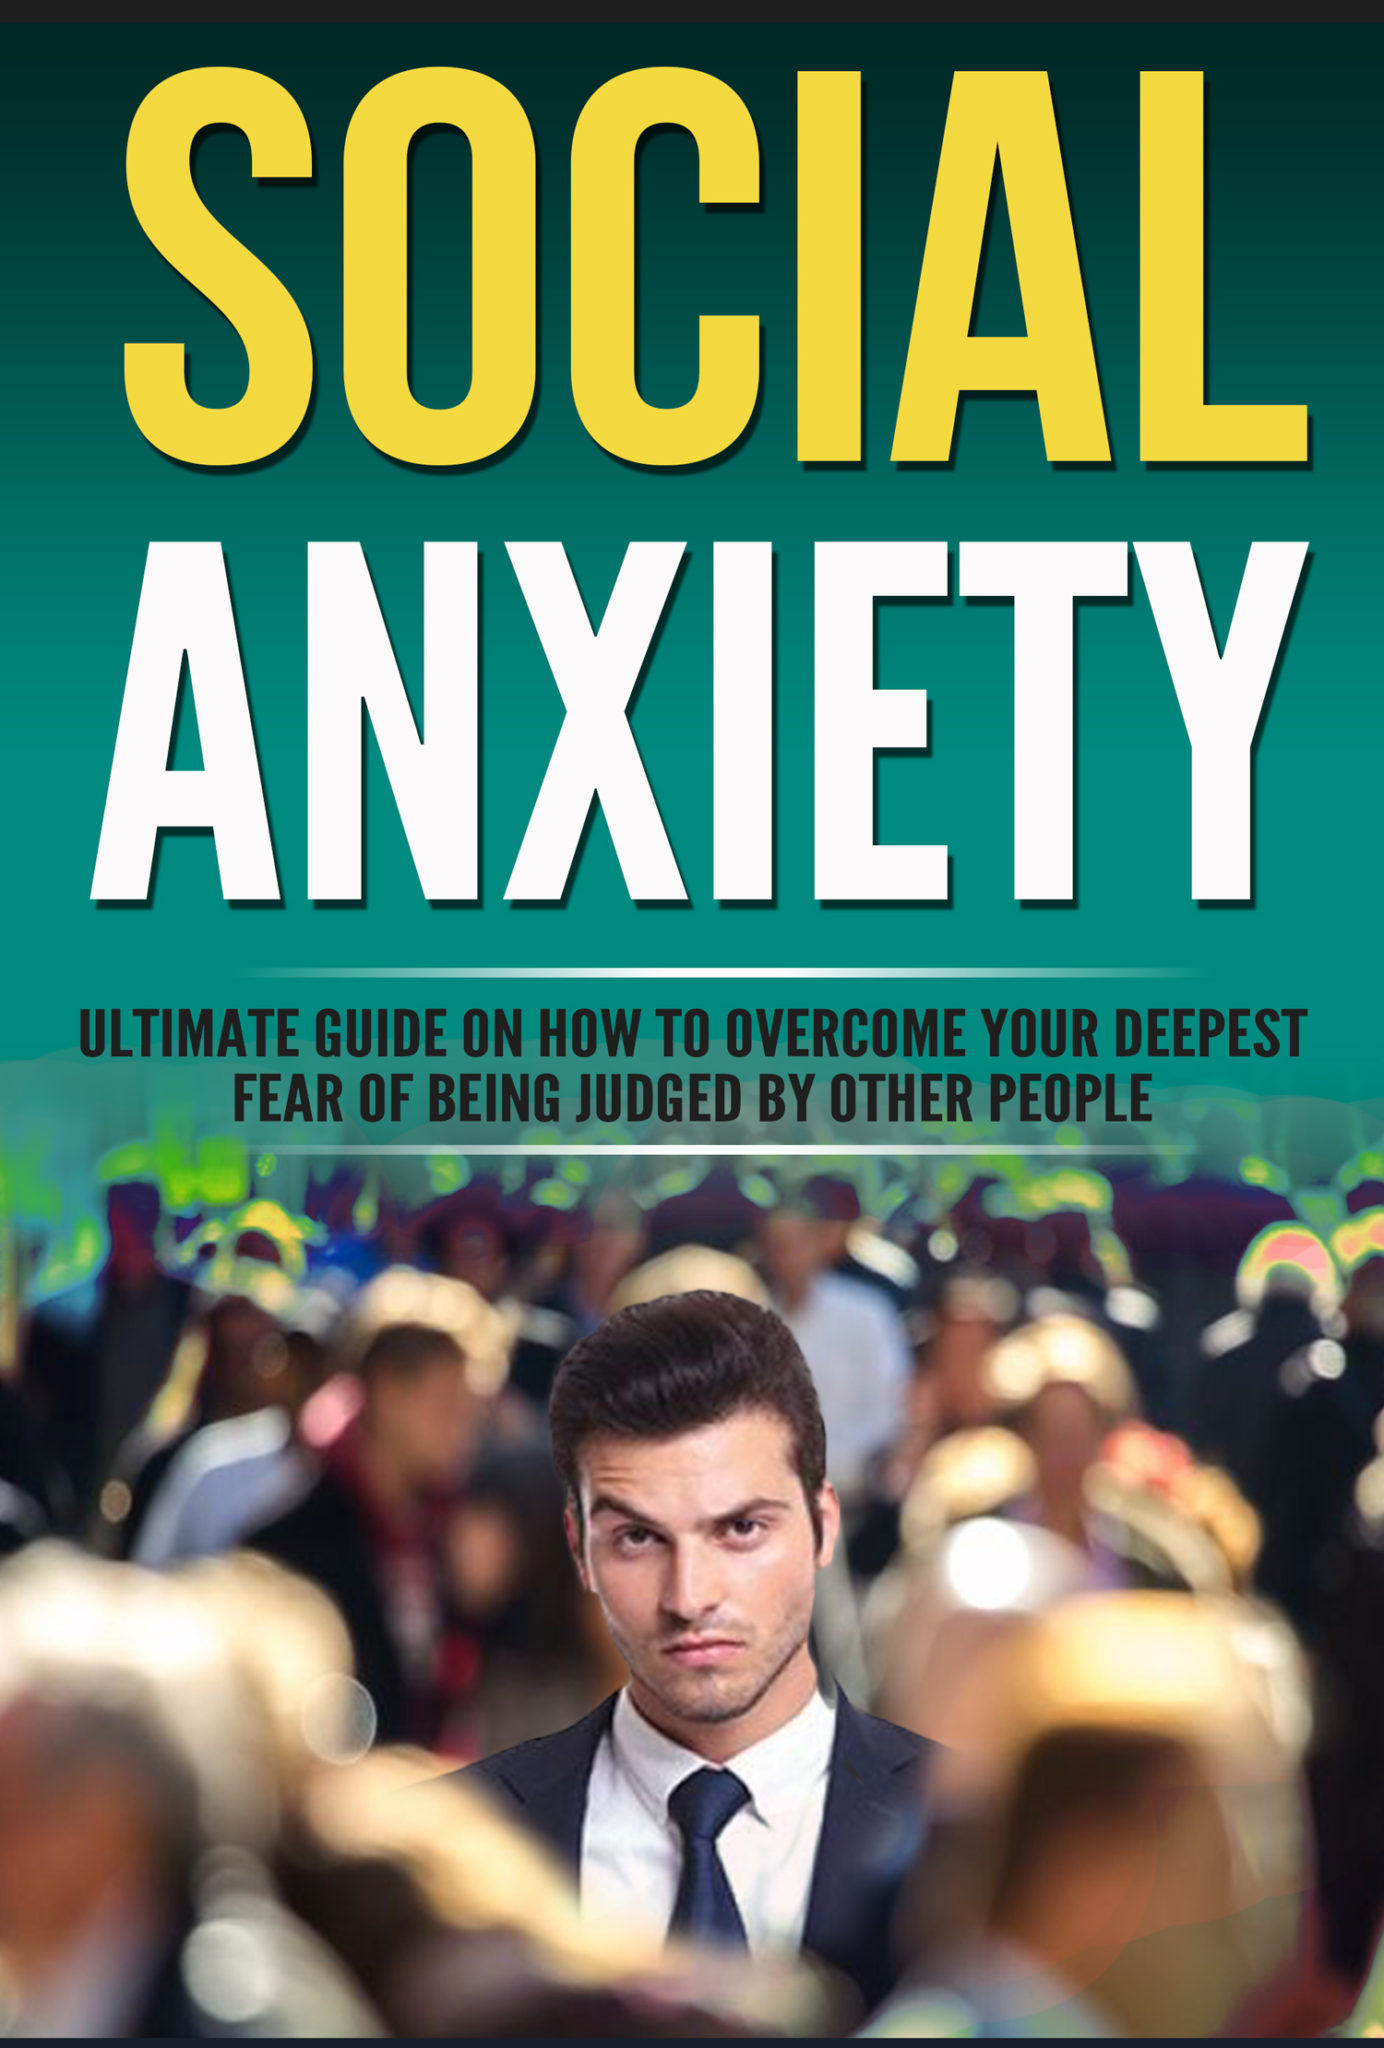 FREE: Social Anxiety: Ultimate Guide On How To Overcome Your Fear Of Being Judged By Other People by Poul West